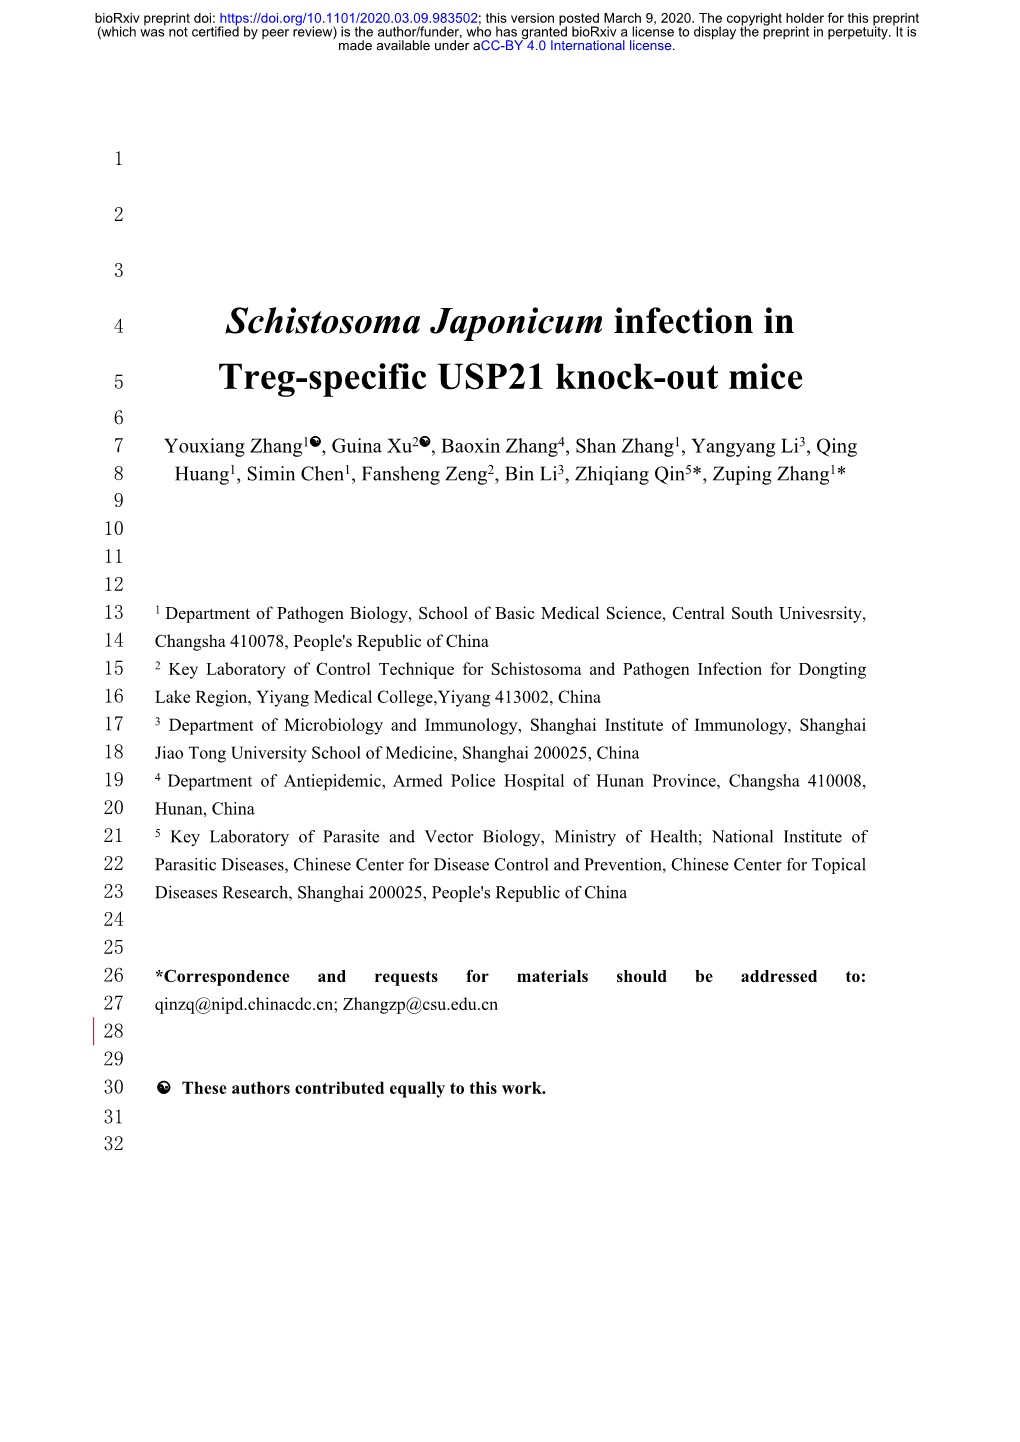 Schistosoma Japonicum Infection in Treg-Specific USP21 Knock-Out Mice